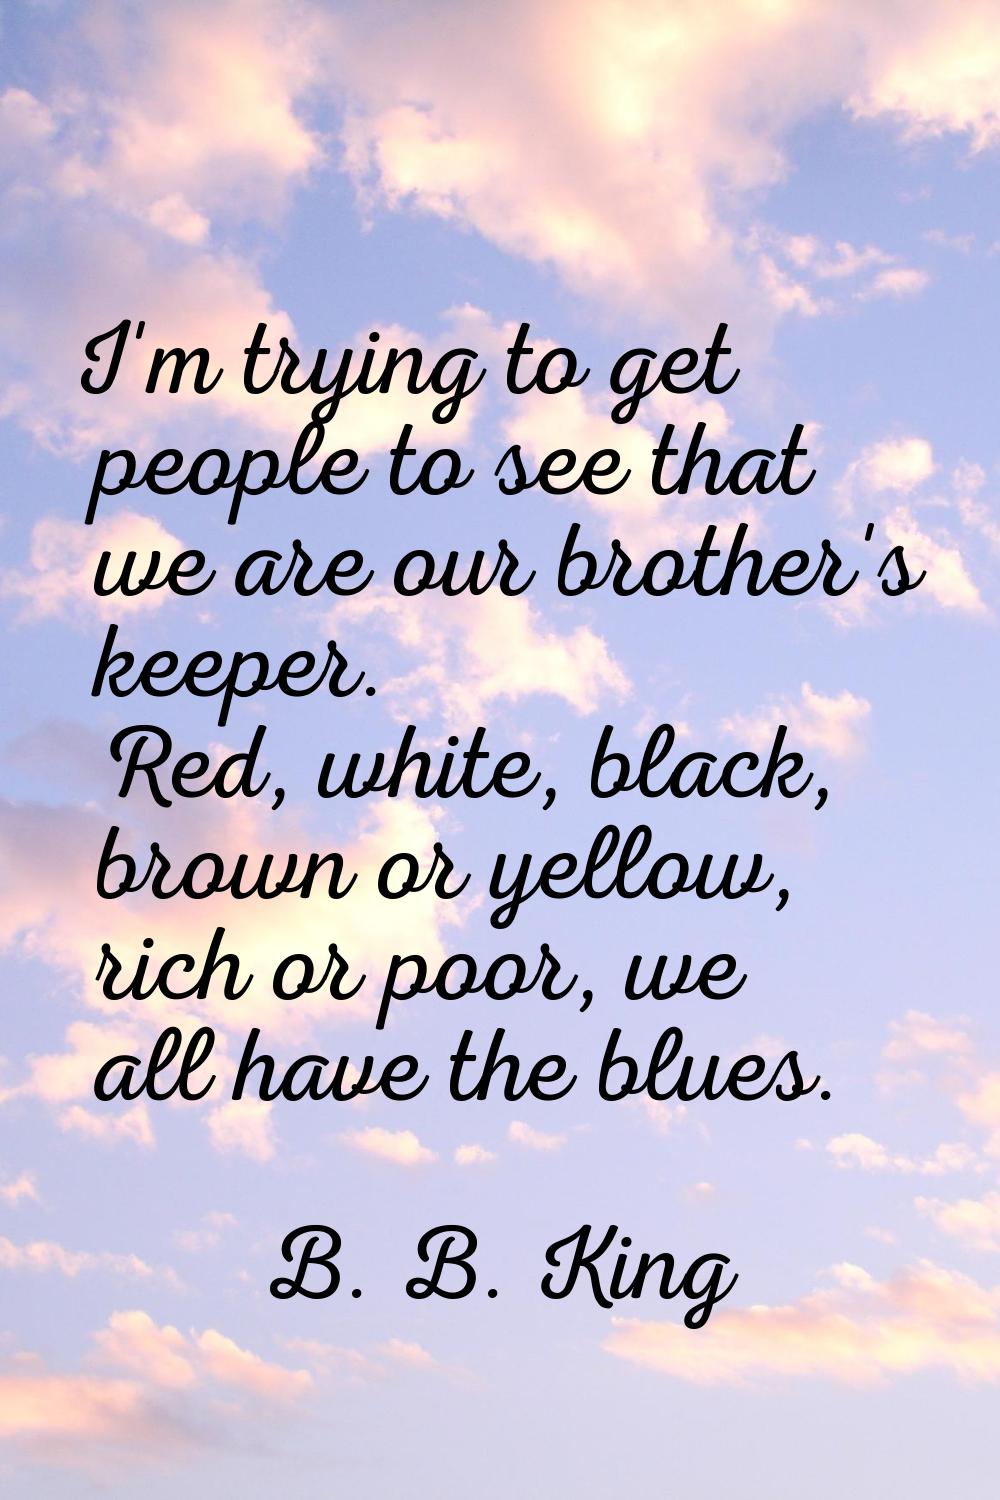 I'm trying to get people to see that we are our brother's keeper. Red, white, black, brown or yello